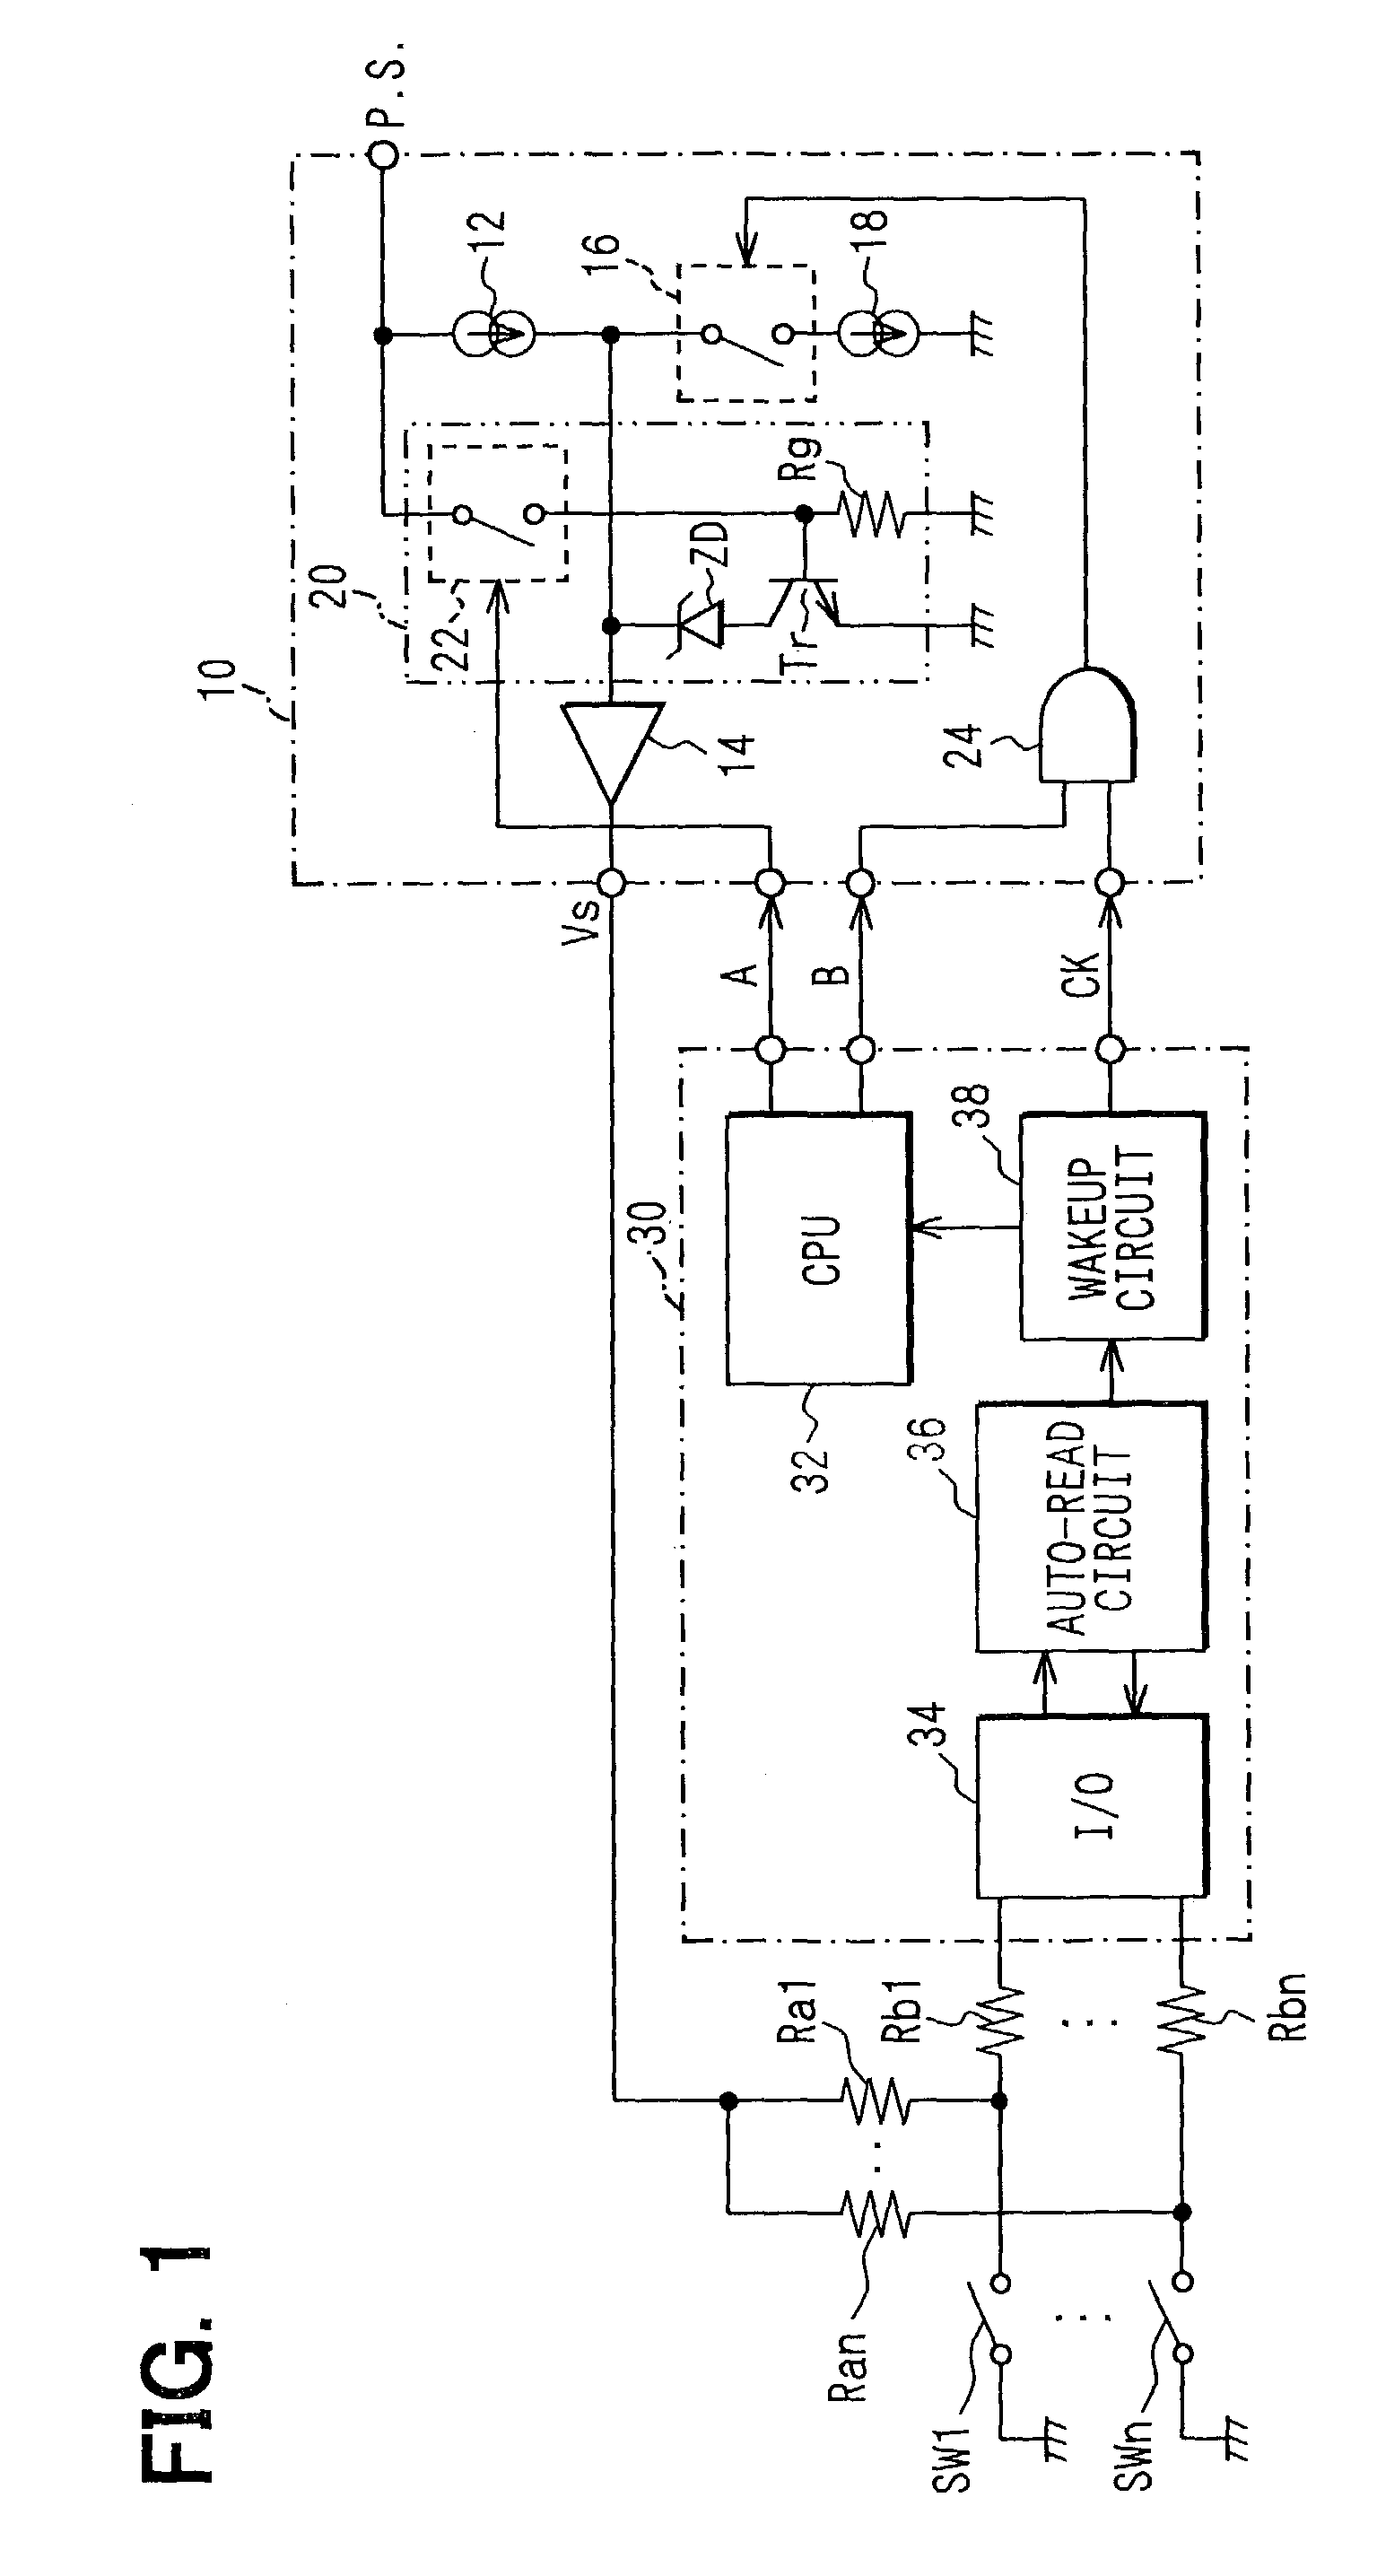 Switching status determination device and method for determining switching status